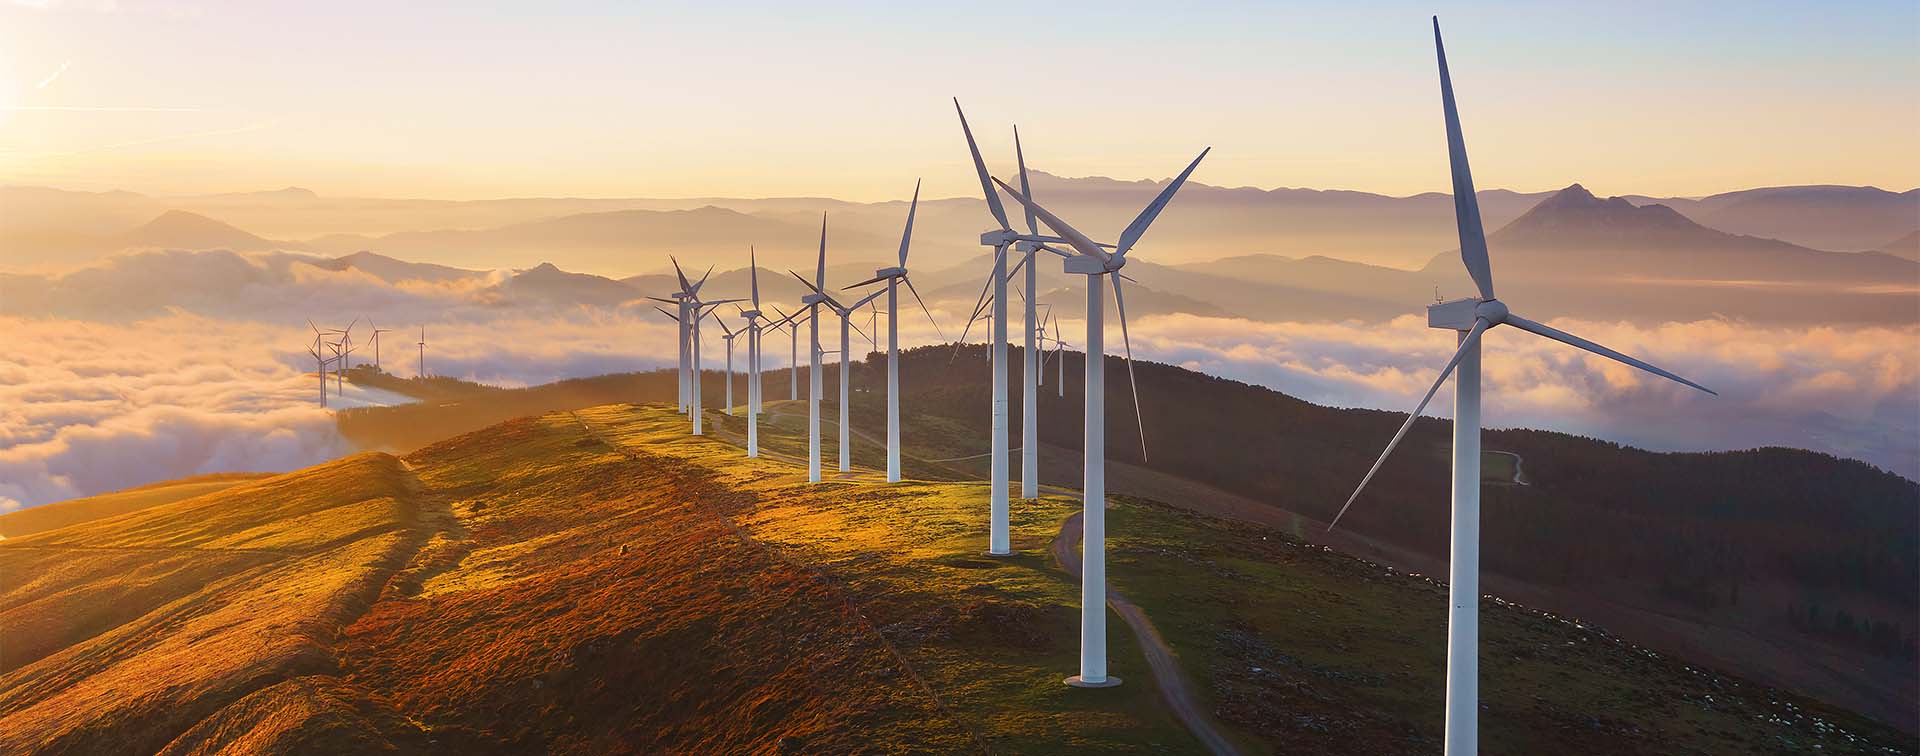 Wind turbines built on a hill in Biscay, Spain at sunset